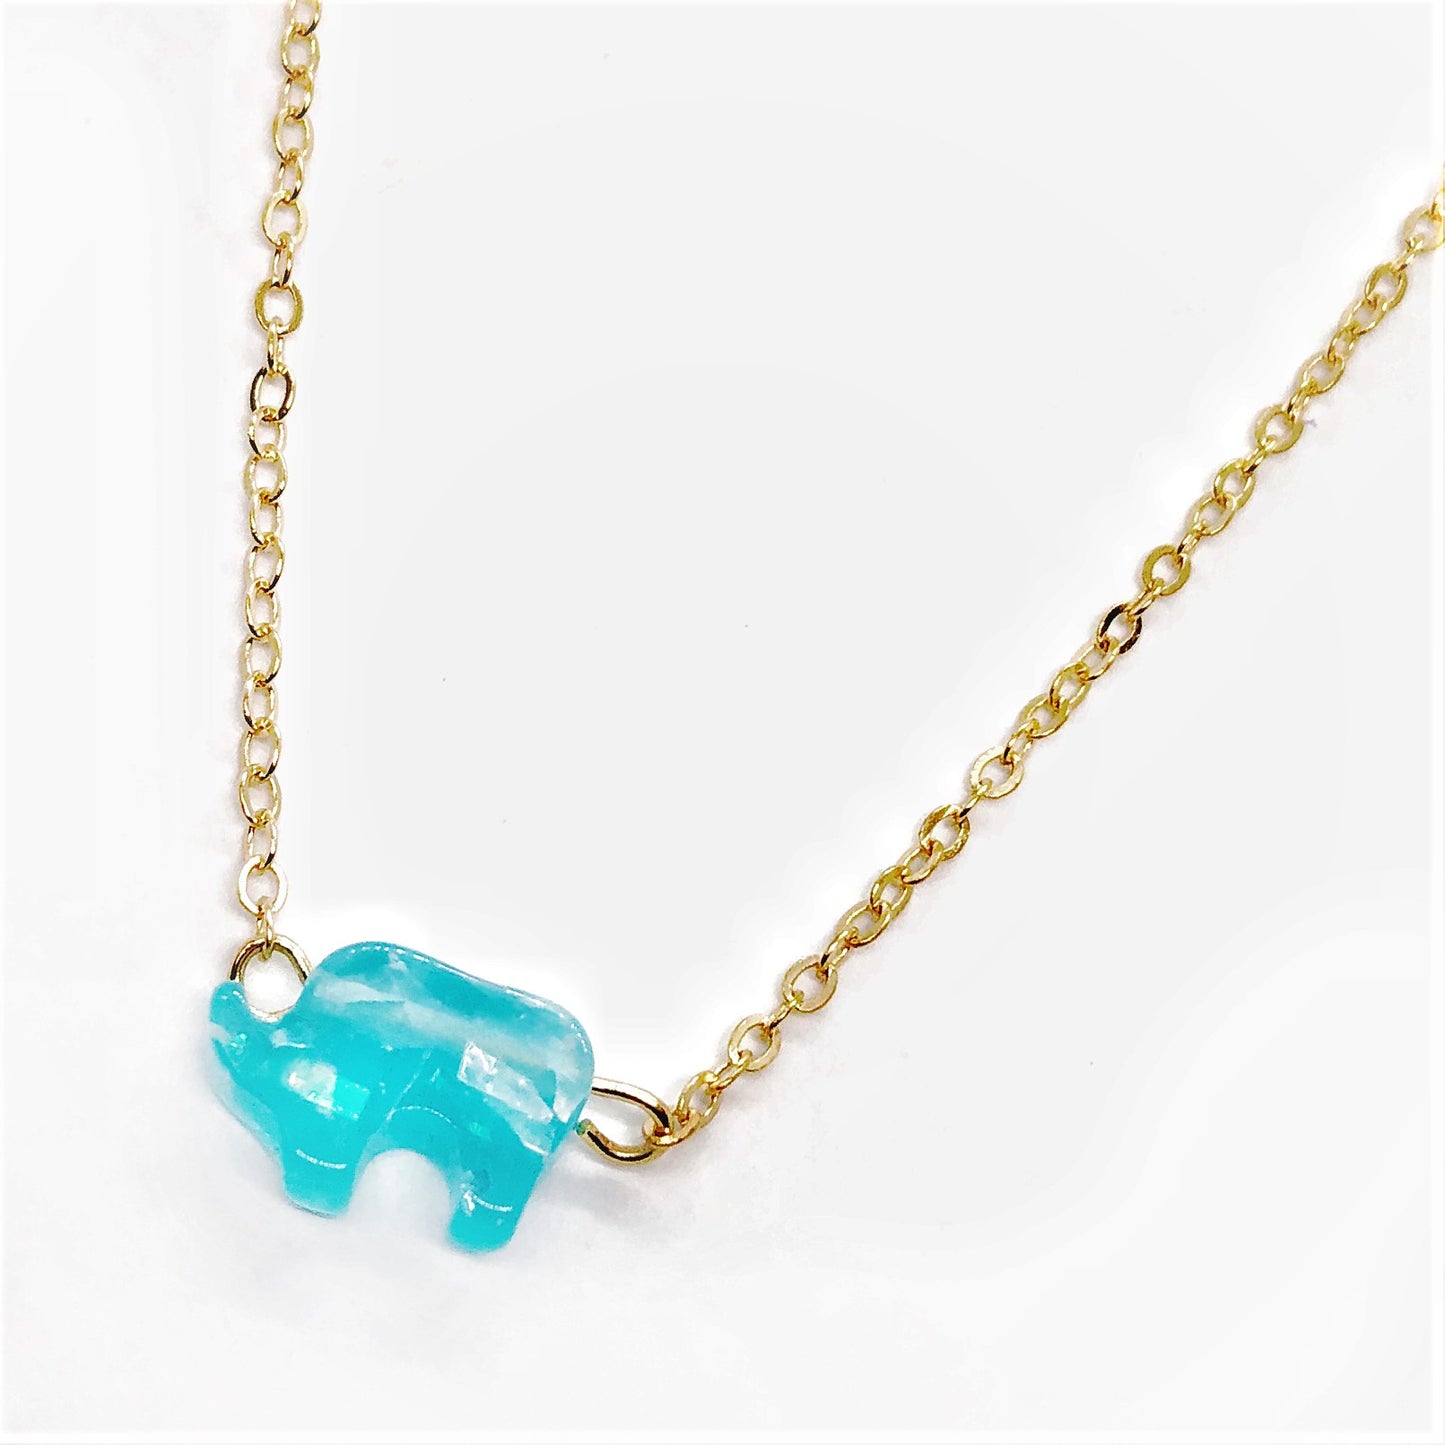 Dainty Chic Elephant Shape Aqua Necklace Special Occasion & Everyday Wear for Women